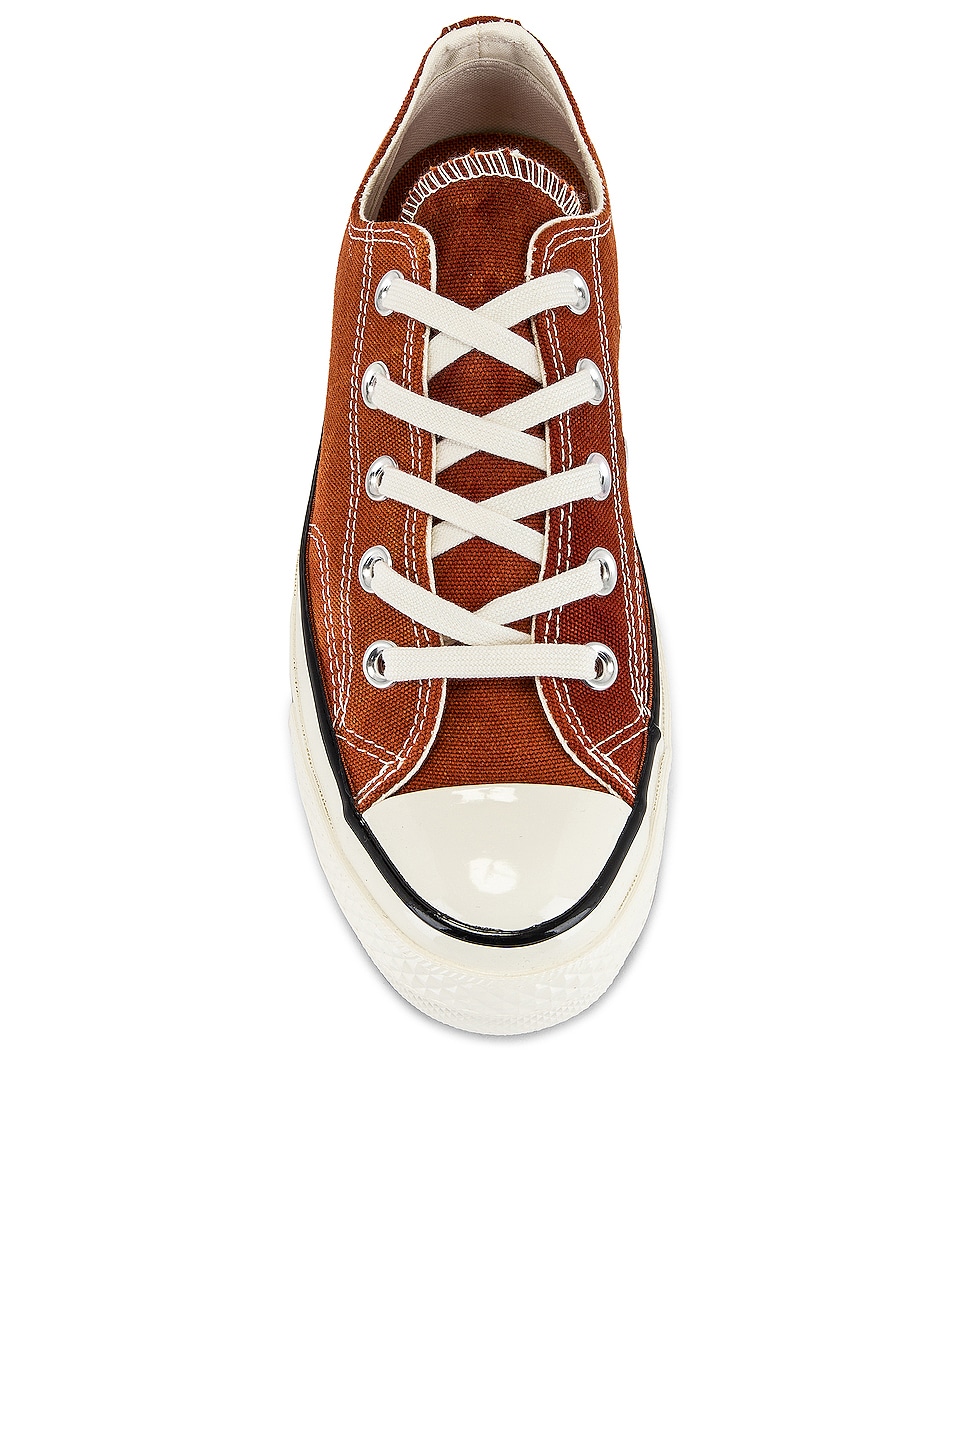 Converse Chuck 70 Ox Washed Canvas Red Bark